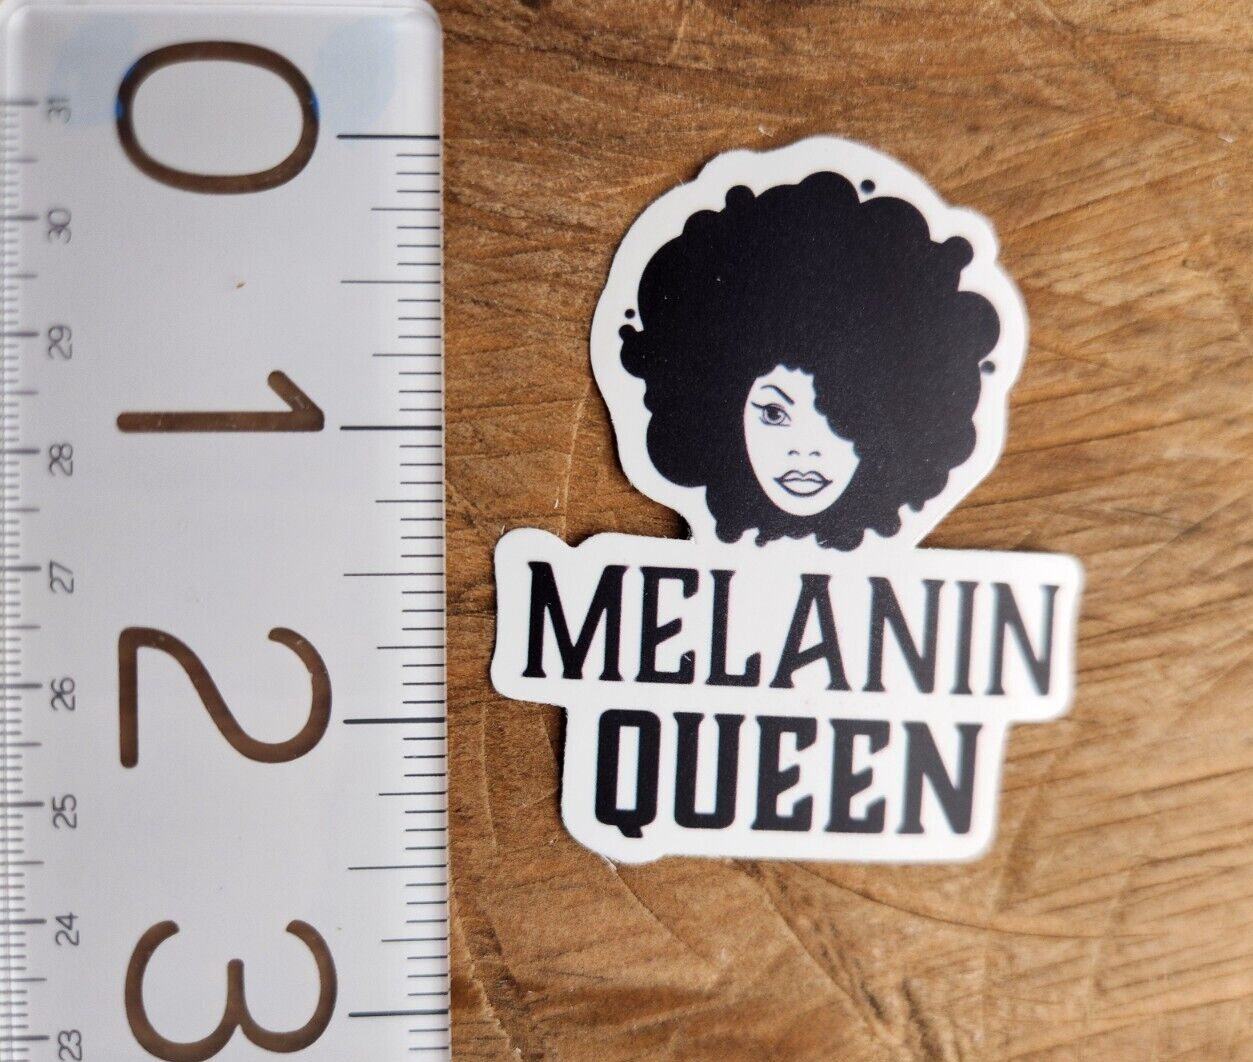 Black Woman Sticker Black Woman Decal African American Woman Strong Black Queen